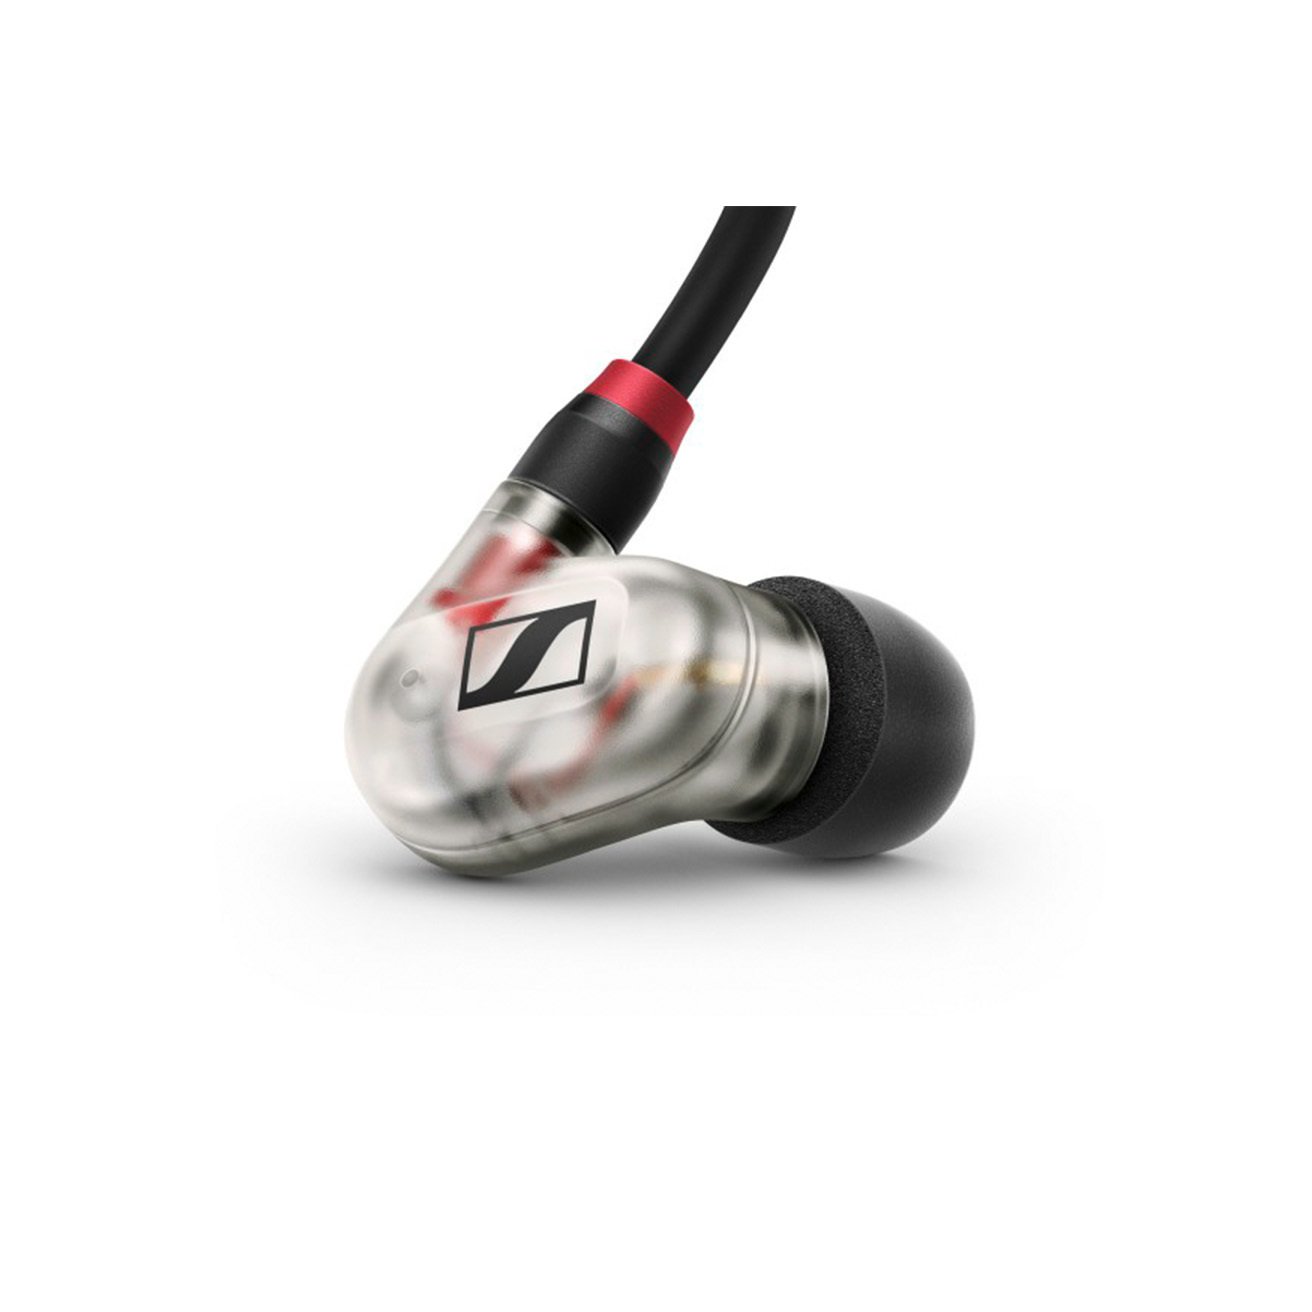 Sennheiser Ie 400 Pro Clear - Ecouteur Intra-auriculaire - Variation 1